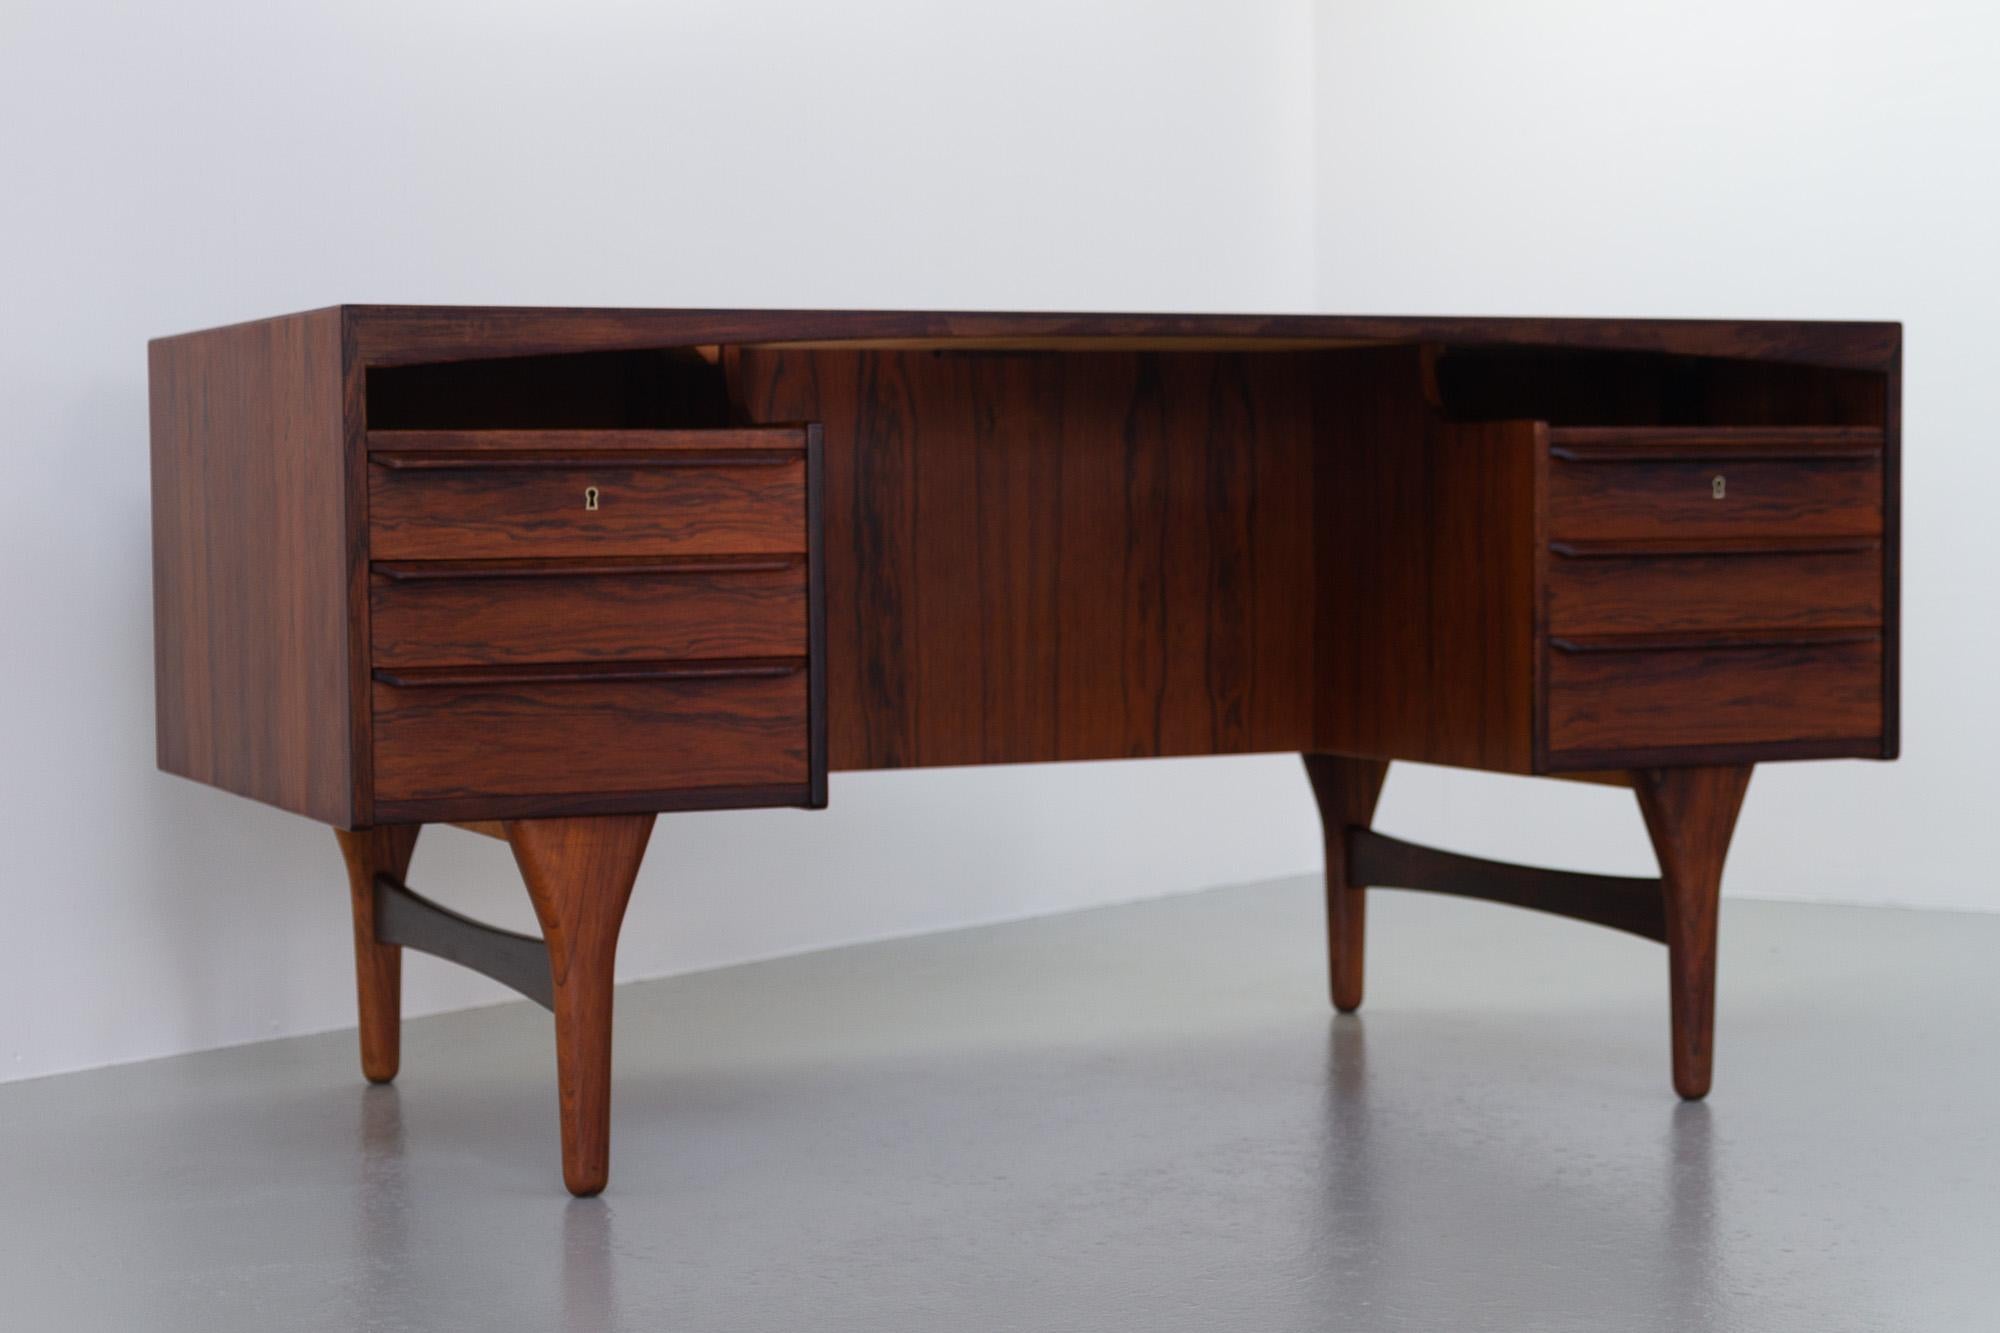 Danish Mid-Century Modern Rosewood desk by Valdemar Mortensen, 1960s.
High-end freestanding executive Rosewood writing table by Danish master carpenter Valdemar Mortensen from Odense, Denmark.
Table top with arched trim and book matched